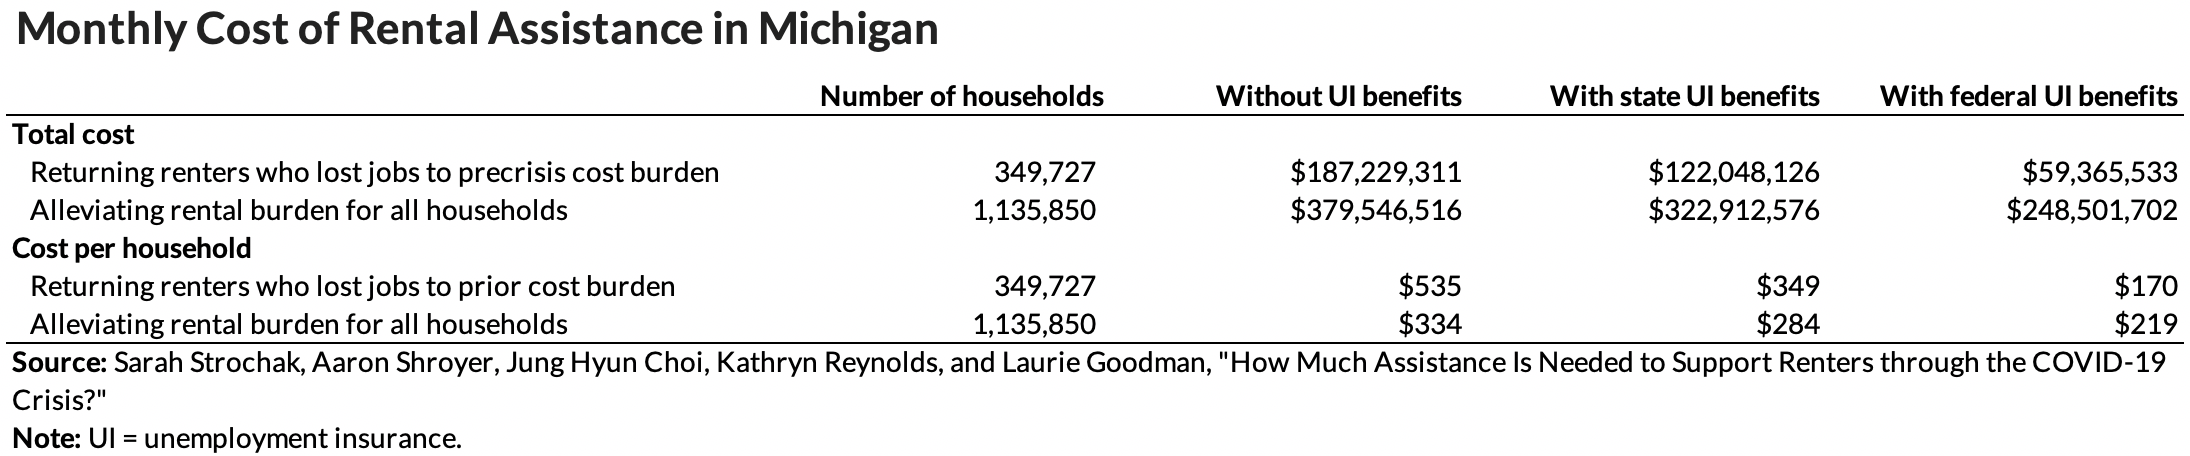 Monthly cost of rental assistance in Michigan